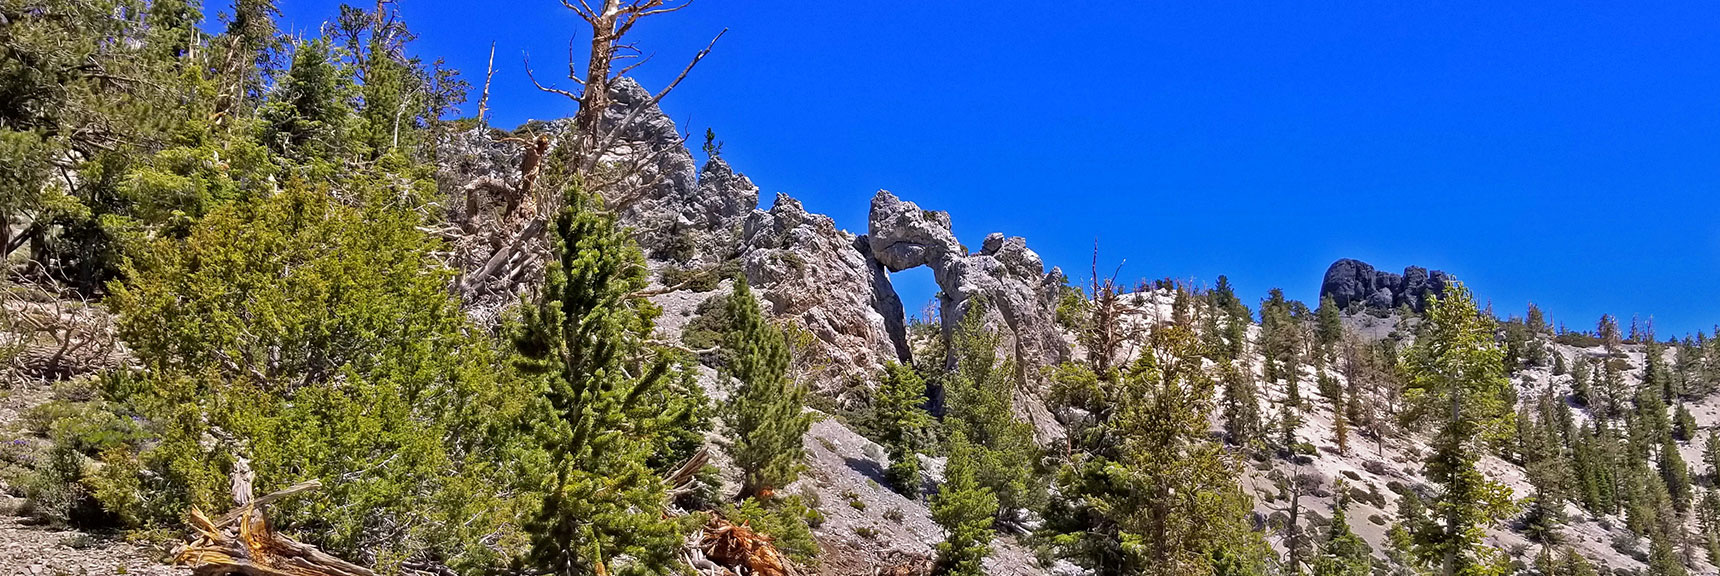 Black Rock Sister Appears and Spectacular Stone Arch to the Left | Black Rock Sister | Mt Charleston Wilderness | Lee Canyon | Spring Mountains, Nevada